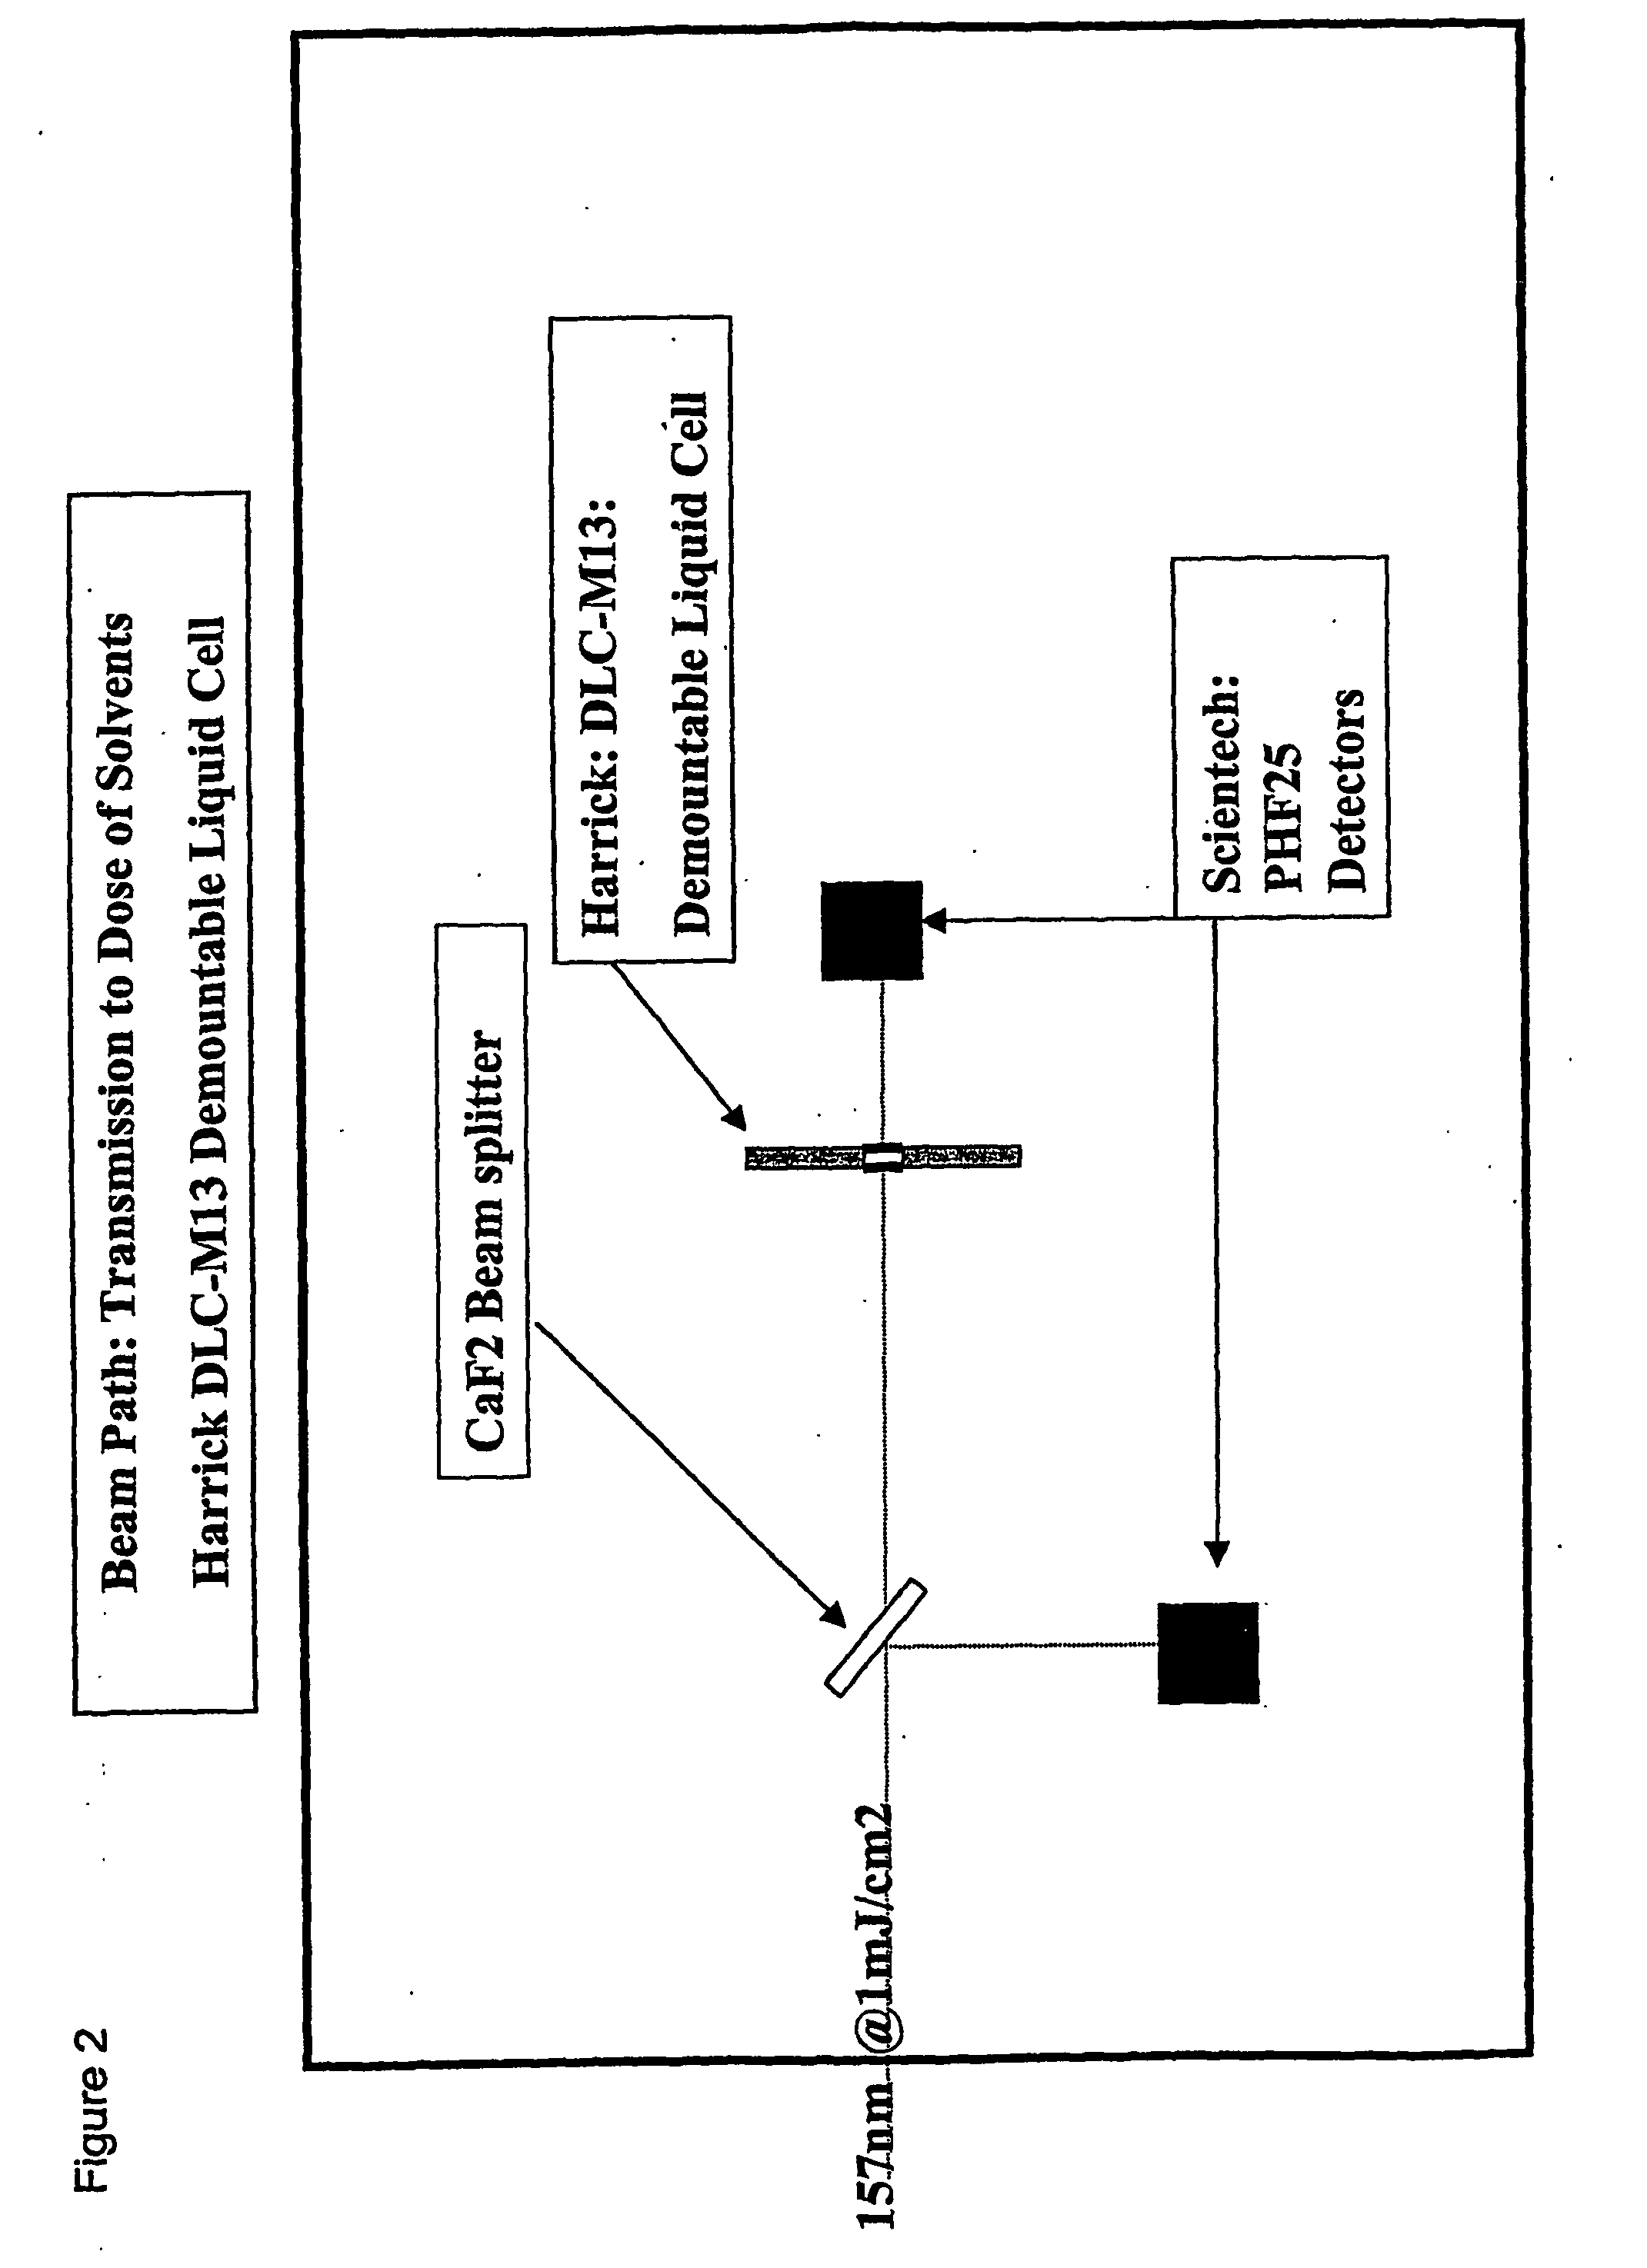 Radiation durable organic compounds with high transparency in the vaccum ultraviolet, and method for preparing